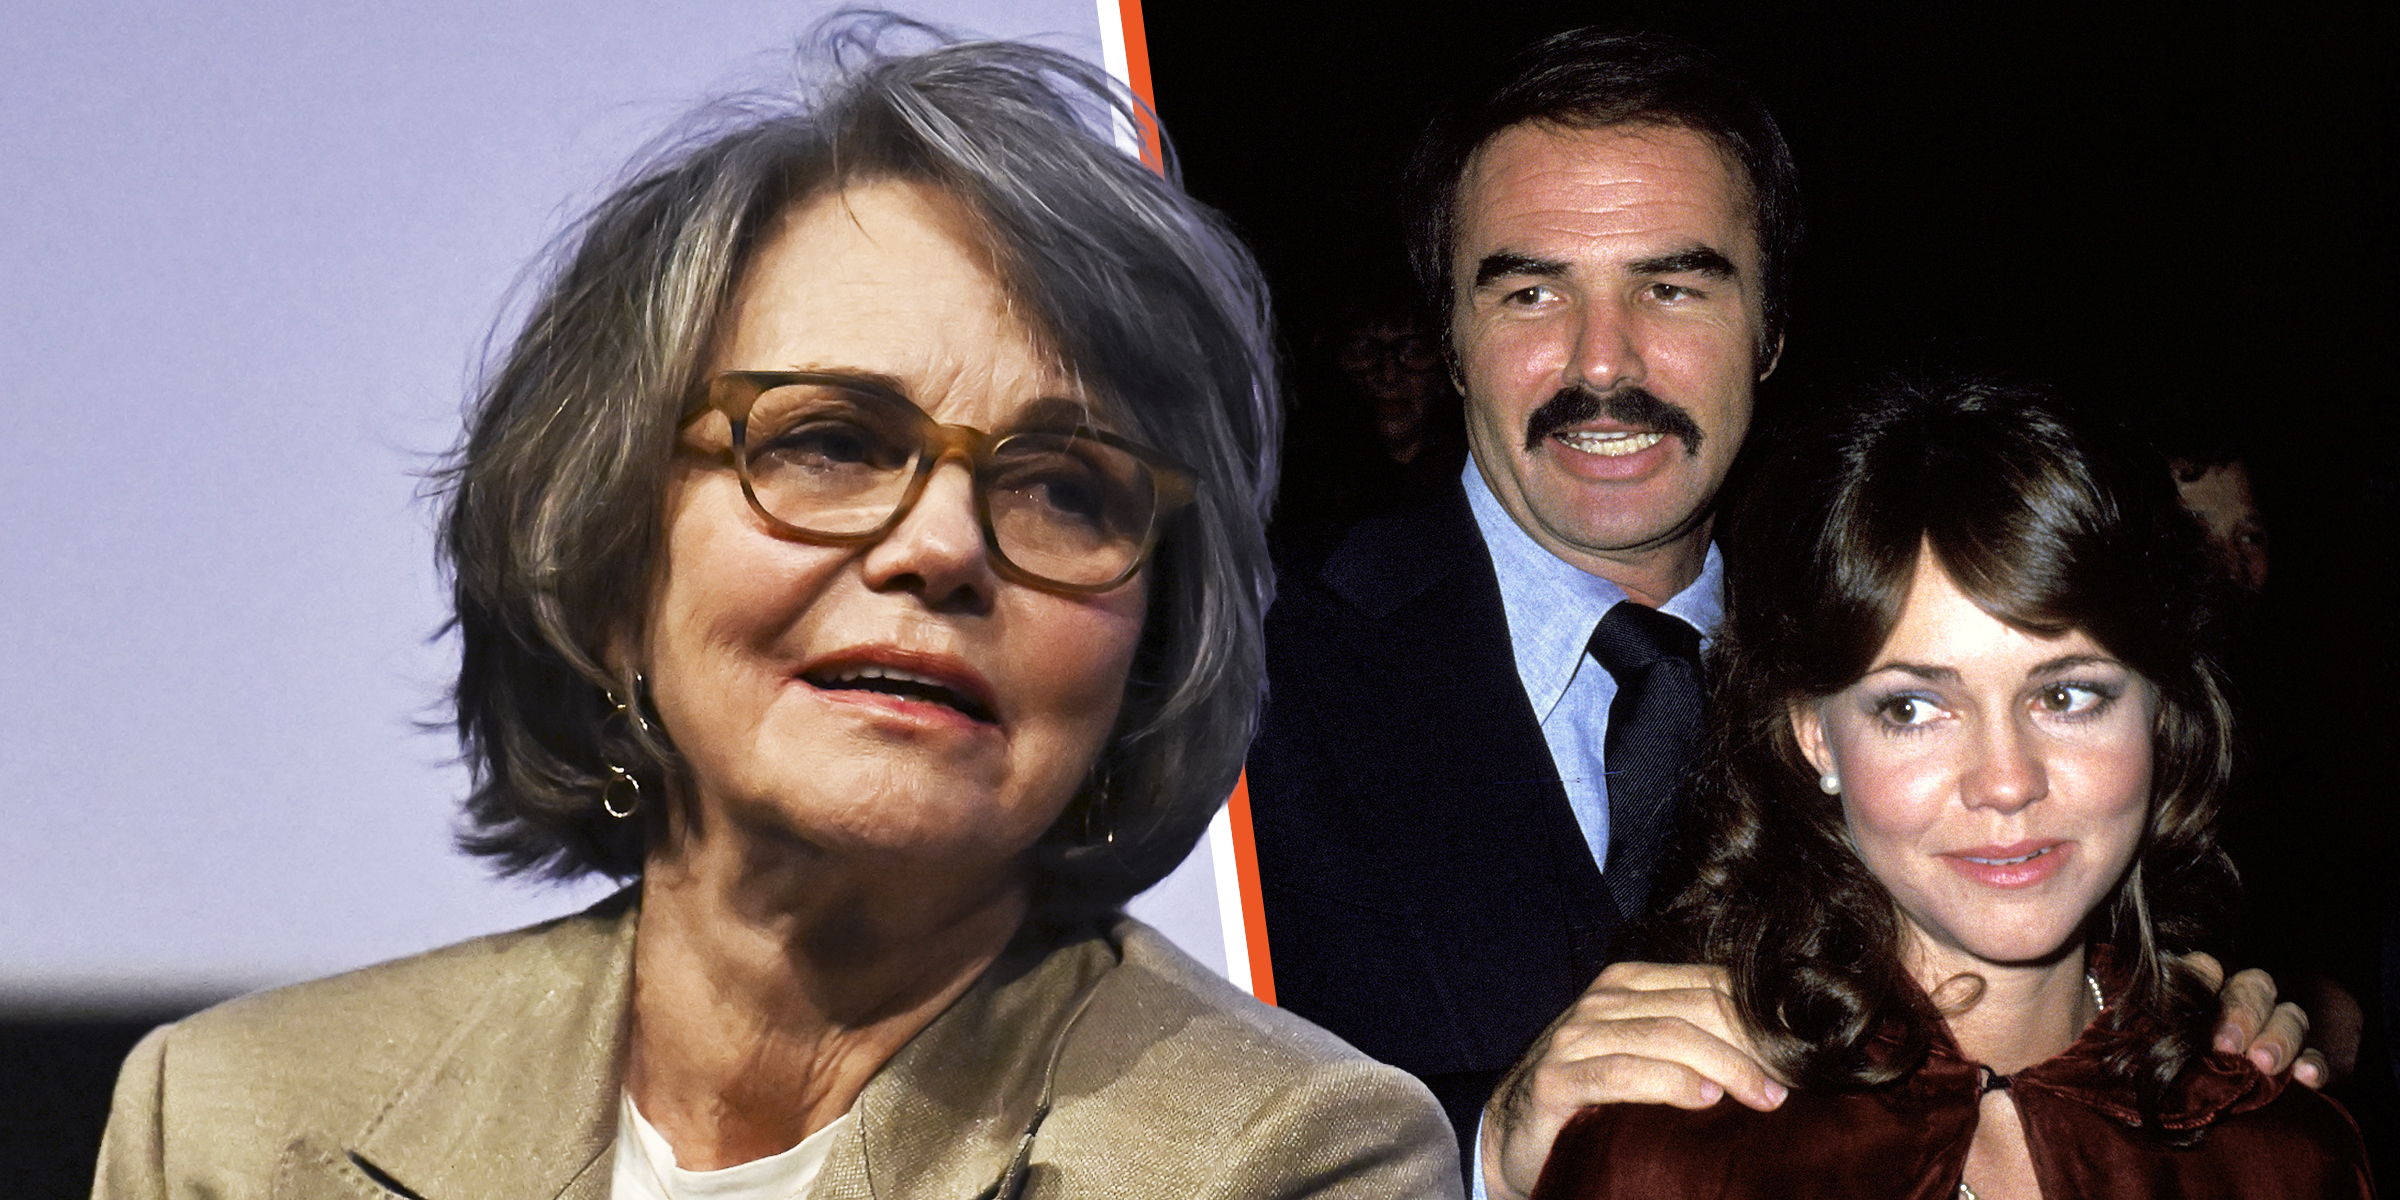 Sally Field | Burt Reynolds and Sally Field | Source: Getty Images